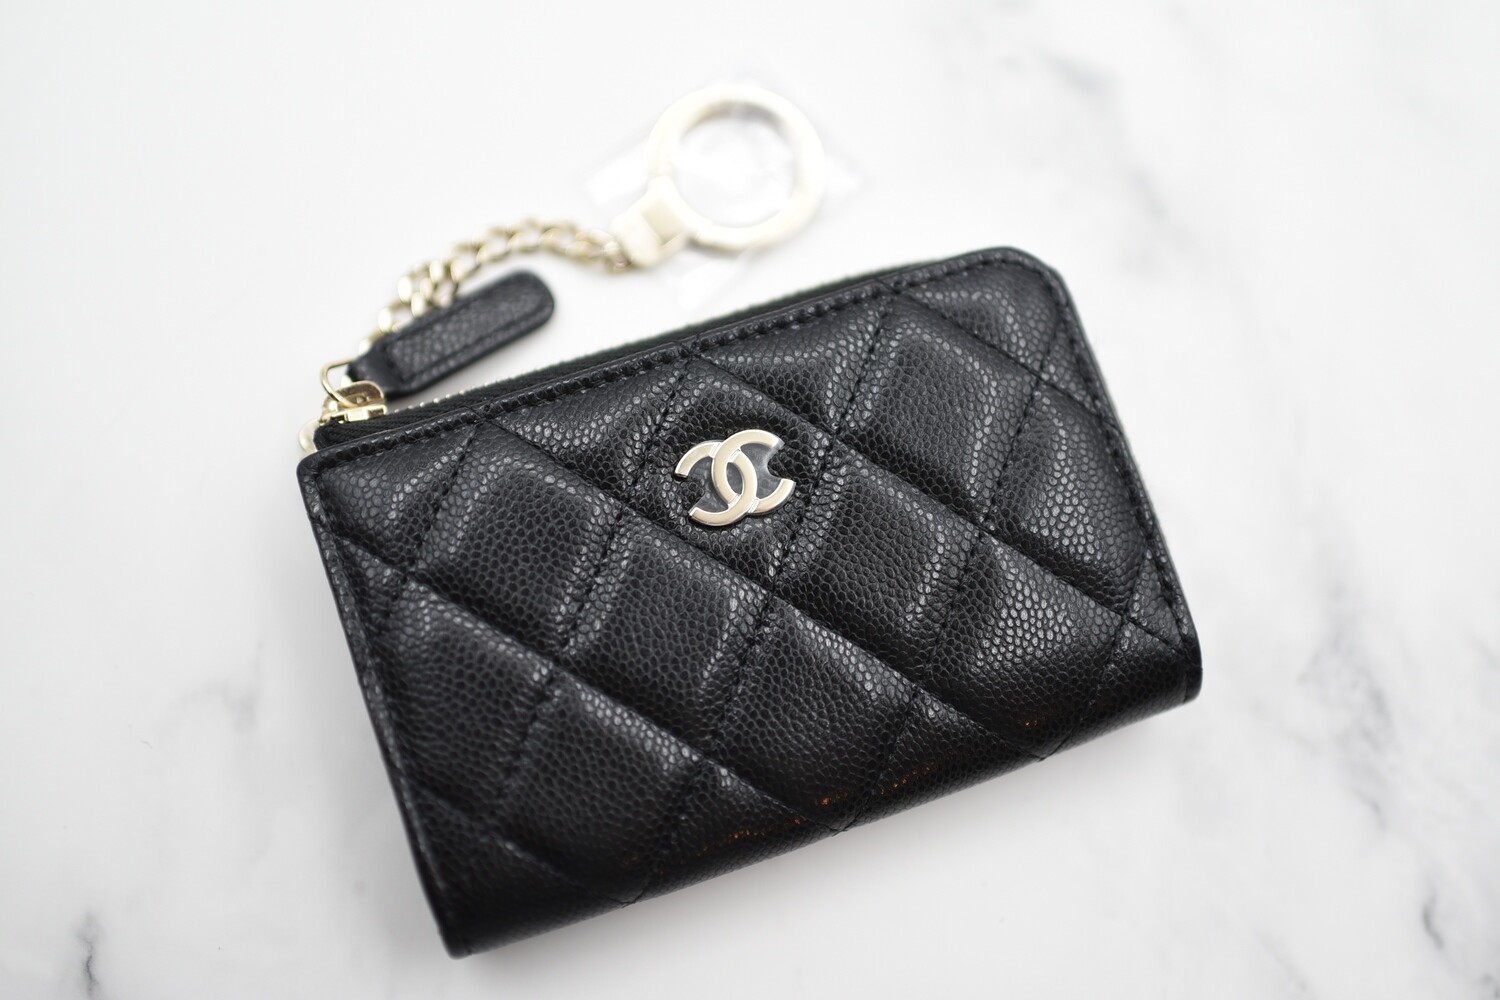 Chanel SLG Zippy Key Holder Card Case, Black Caviar Leather with Gold Hardware, New in Box GA001